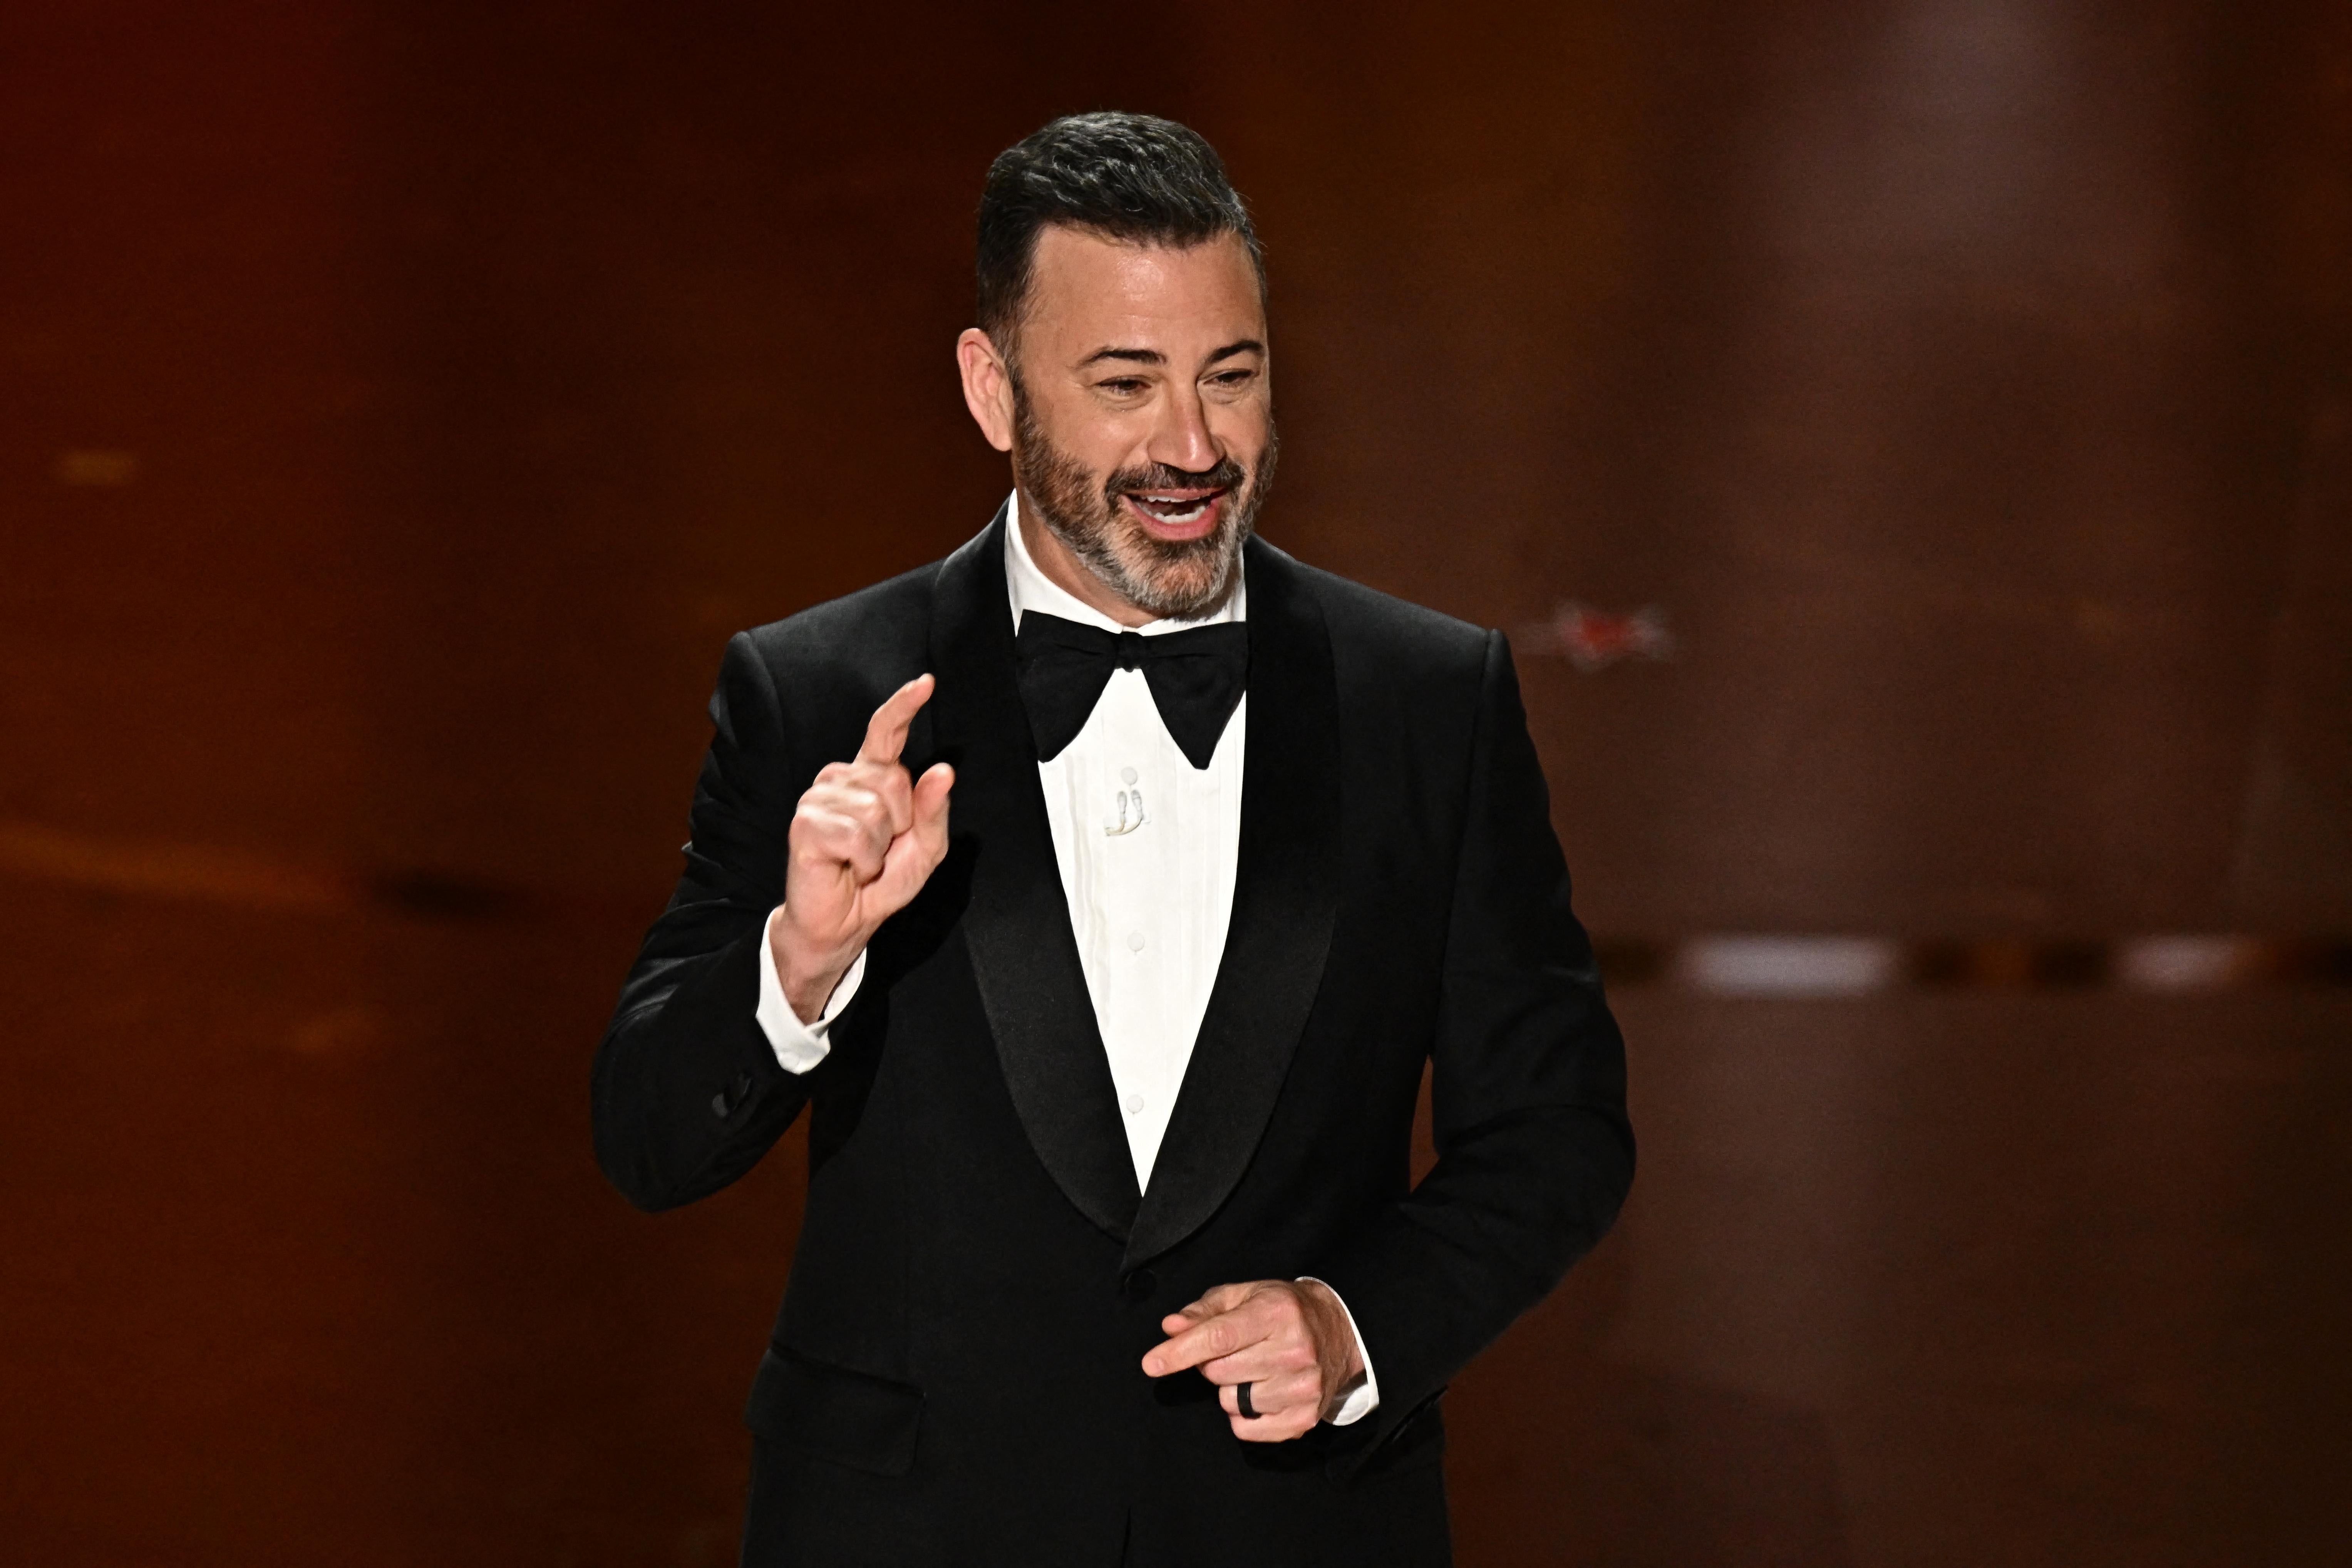 TV host Jimmy Kimmel speaks onstage during the 96th Annual Academy Awards at the Dolby Theatre in Hollywood, California on March 10, 2024. He holds one index finger up and smiles.